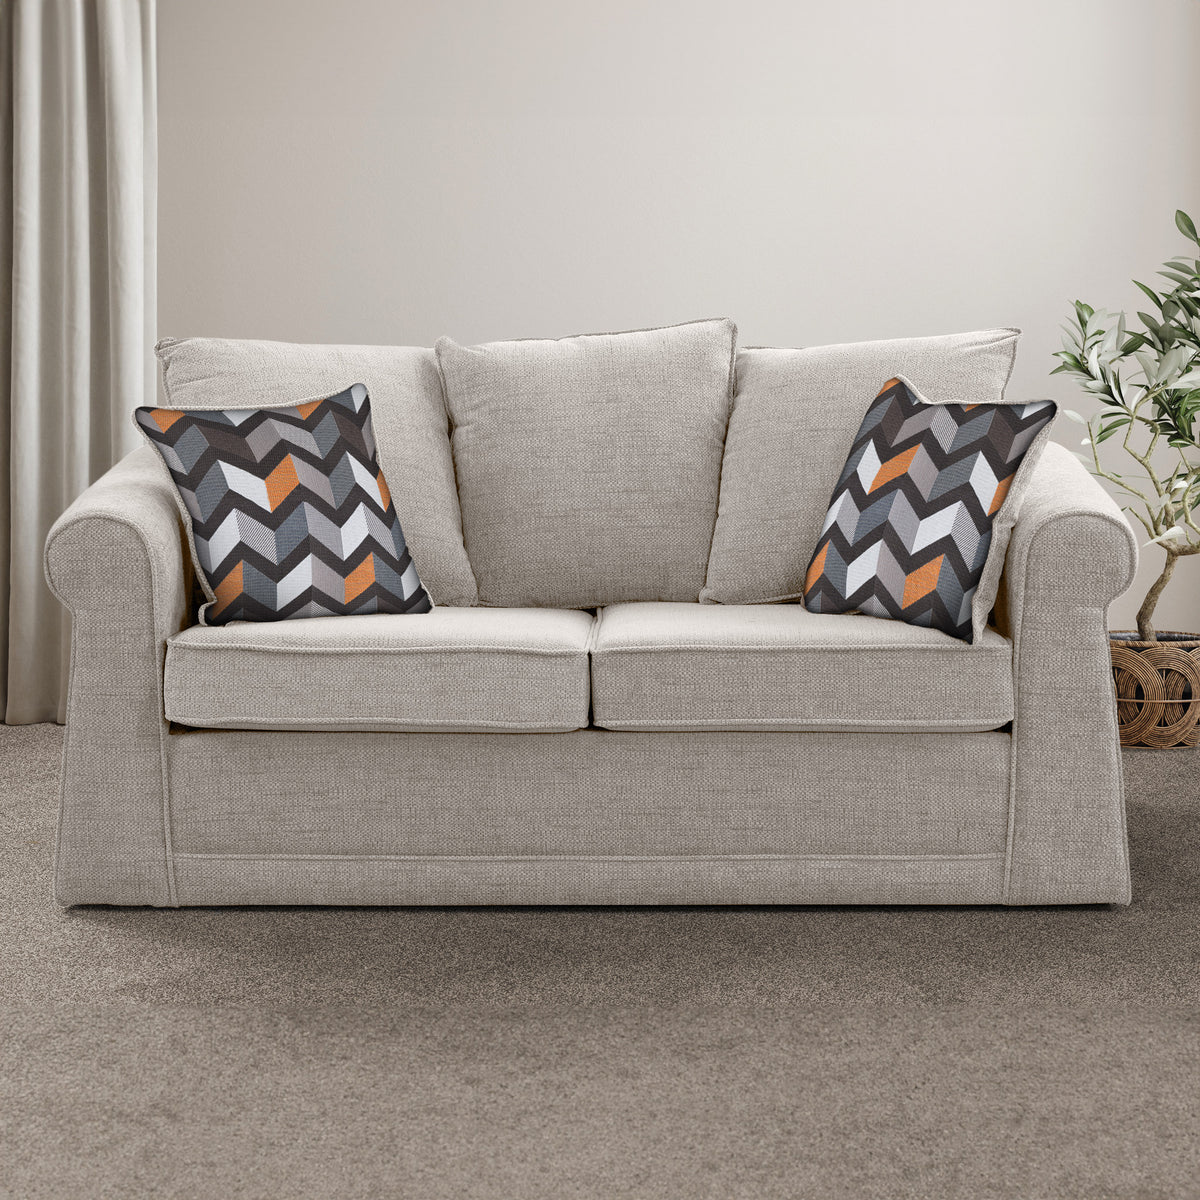 Branston Oatmeal Soft Weave 2 Seater Sofabed with Charcoal Scatter Cushions from Roseland Furniture